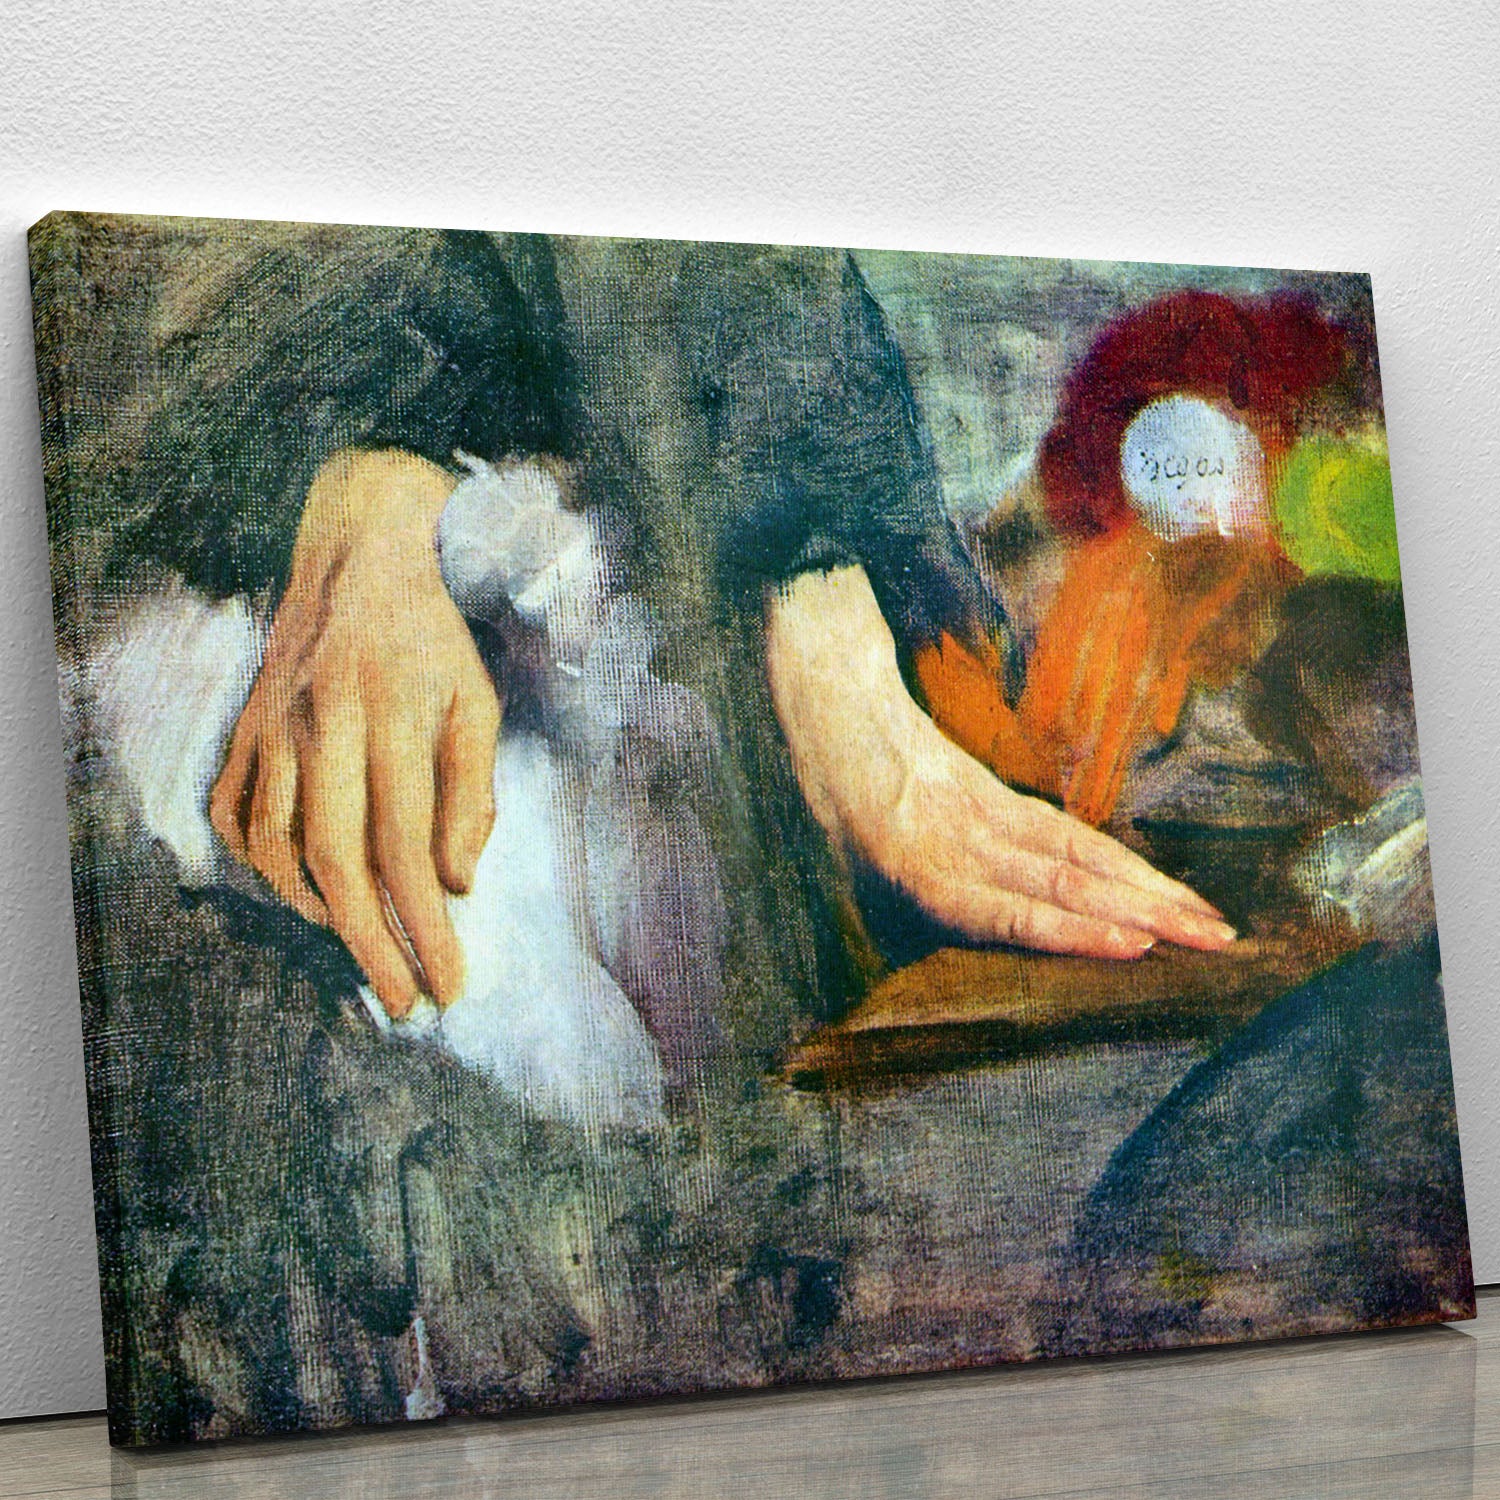 Hand Study by Degas Canvas Print or Poster - Canvas Art Rocks - 1